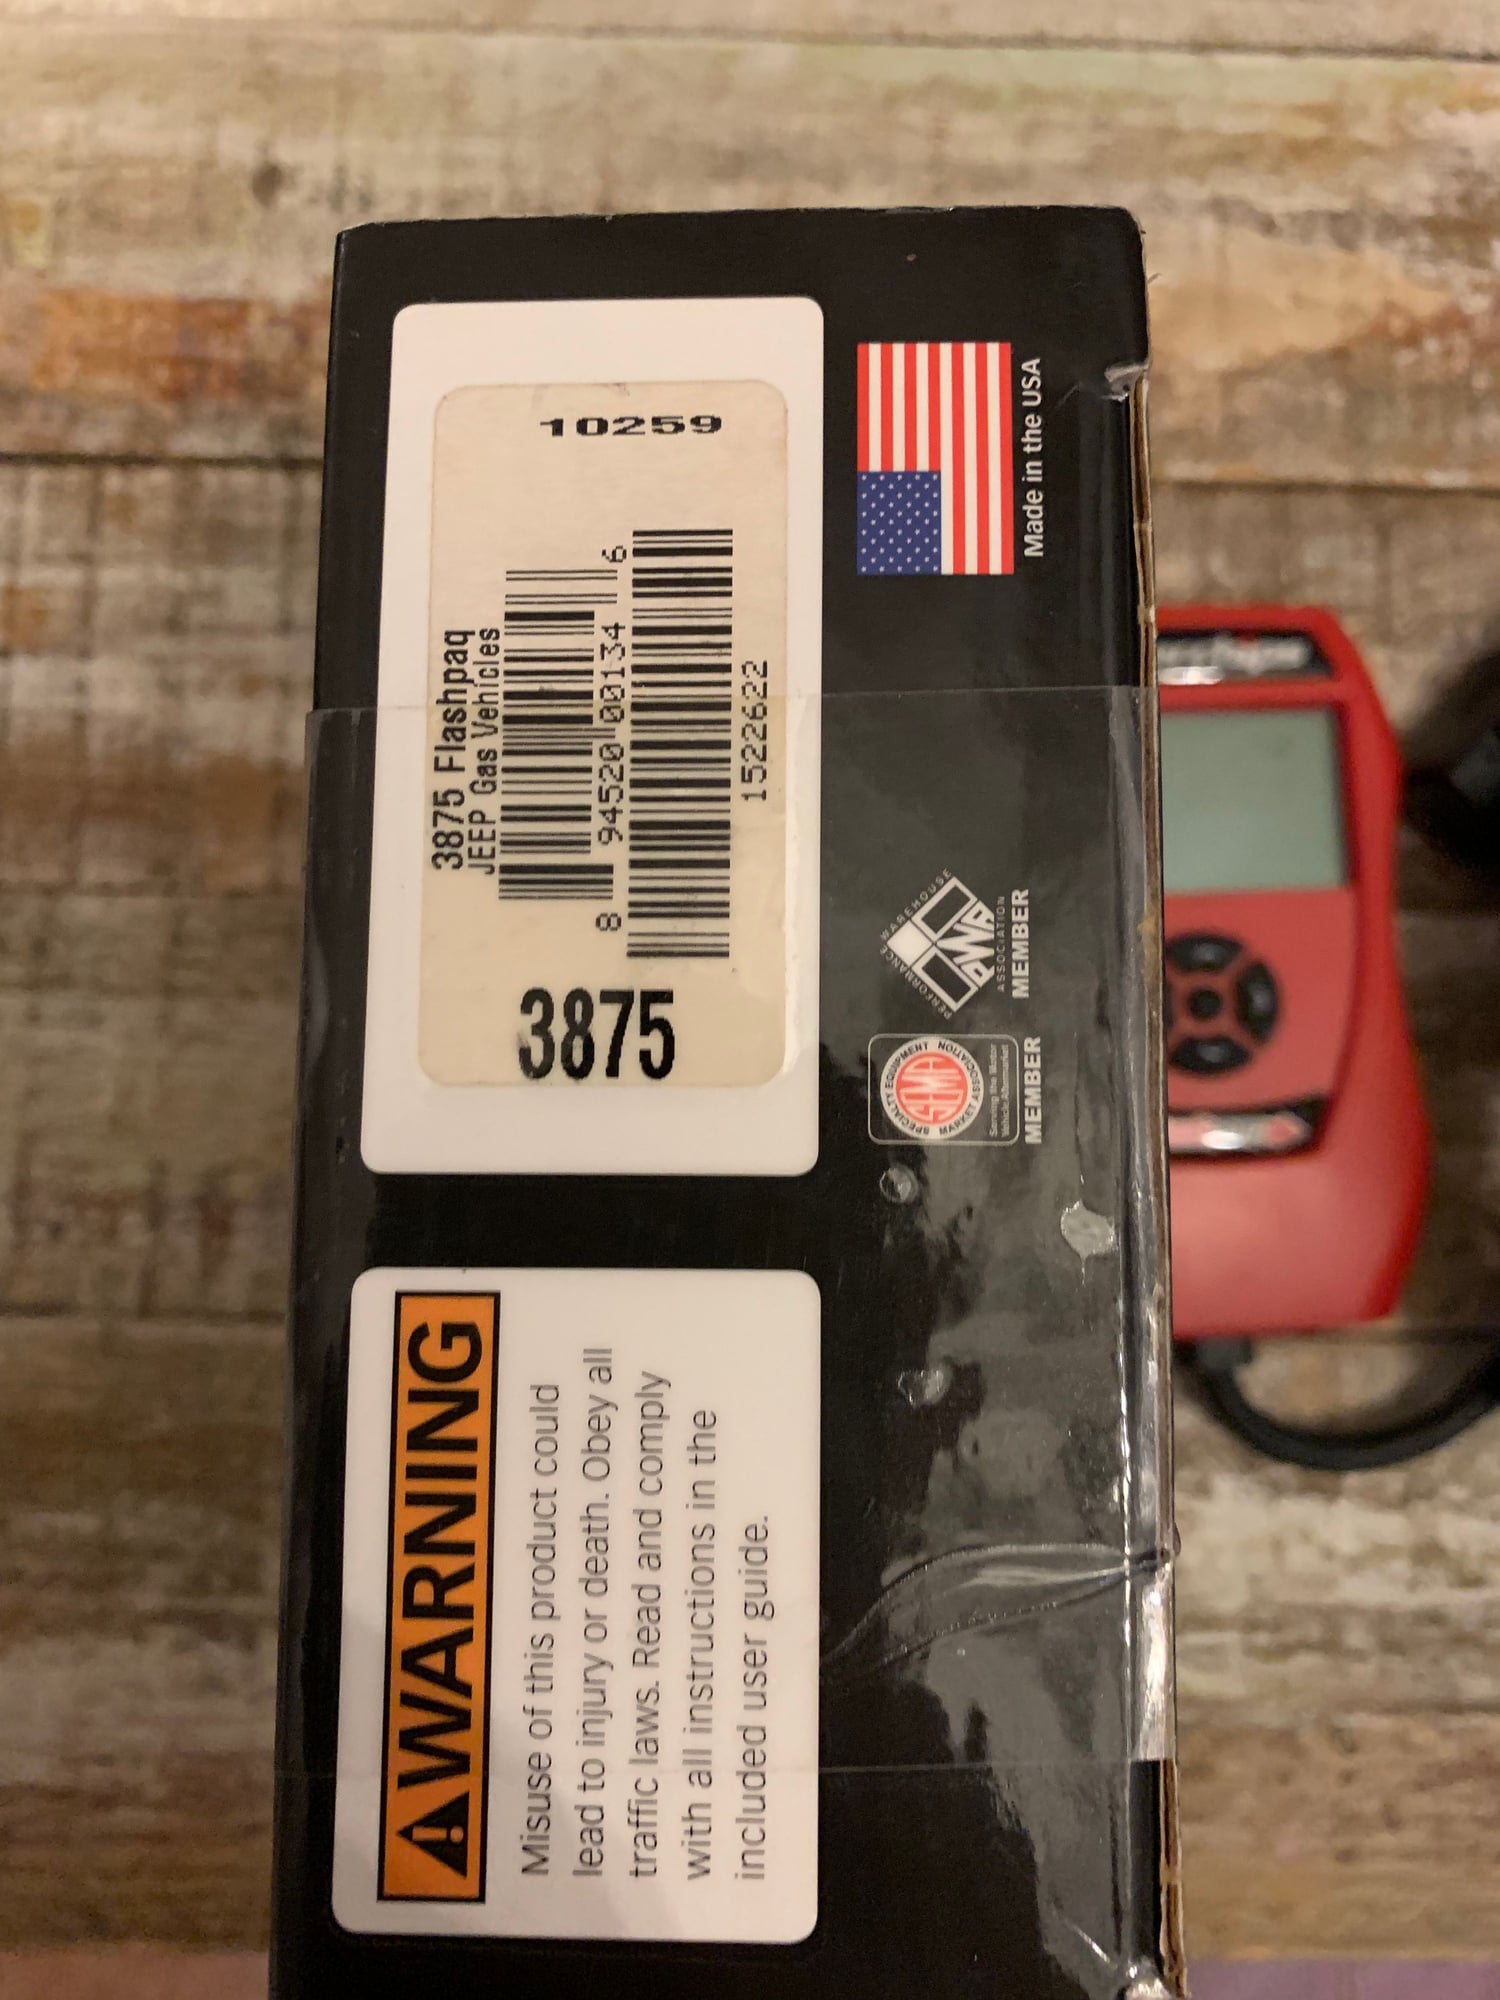 Accessories - Superchips flashpaq 3875 unlocked - Used - 1998 to 2010 Jeep Wrangler - Hendersonville, TN 37075, United States